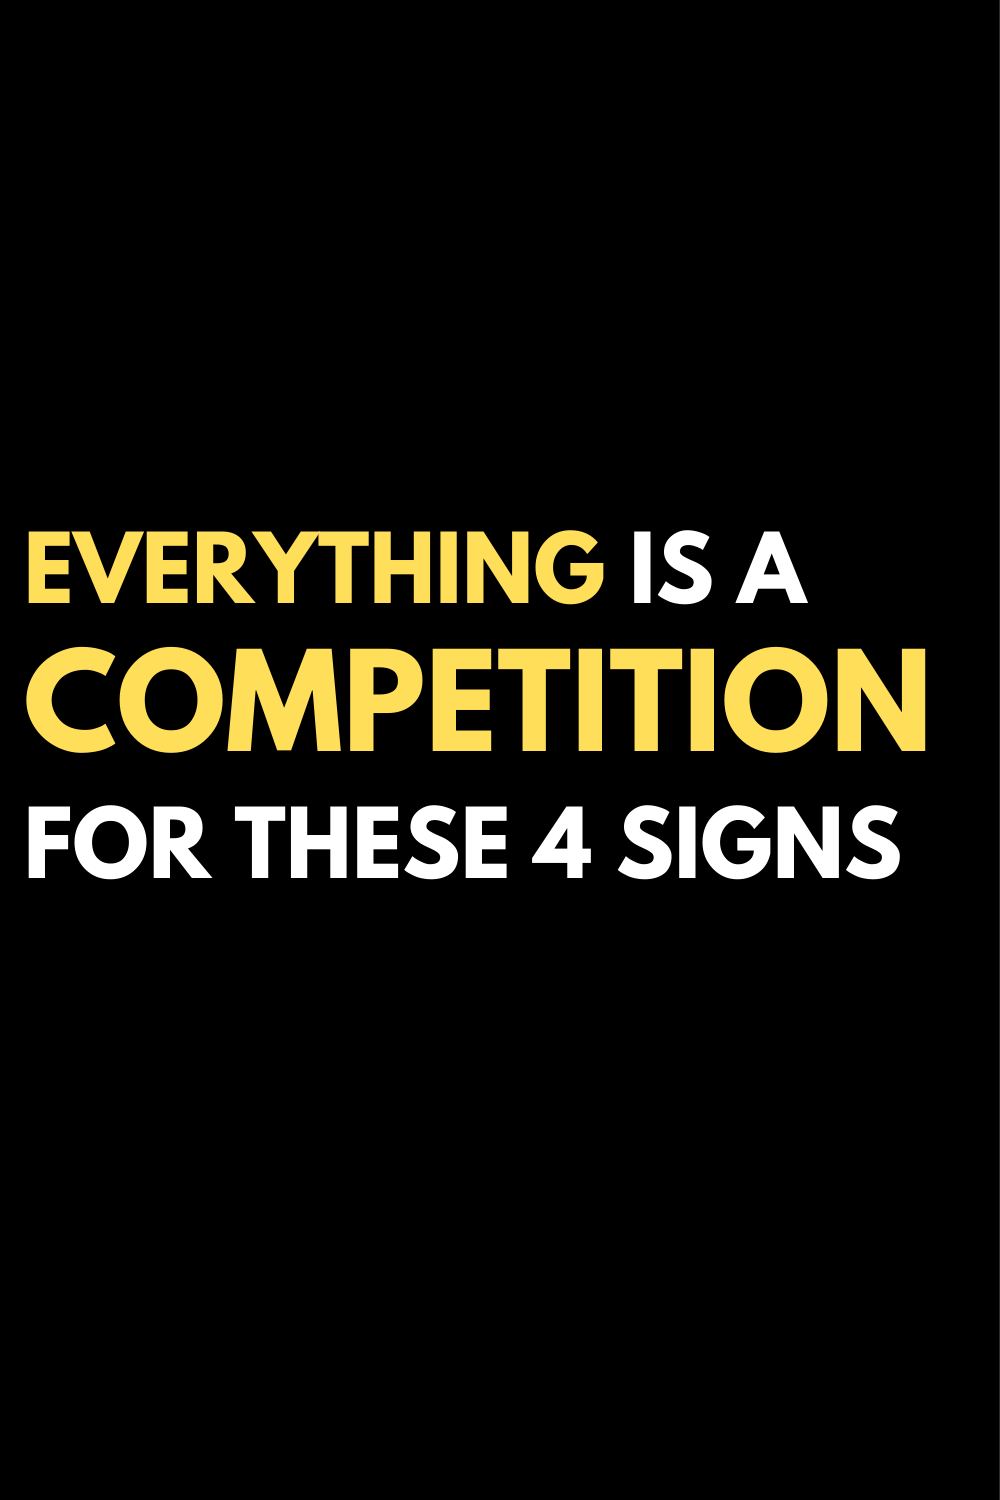 Everything is a competition for these 4 signs